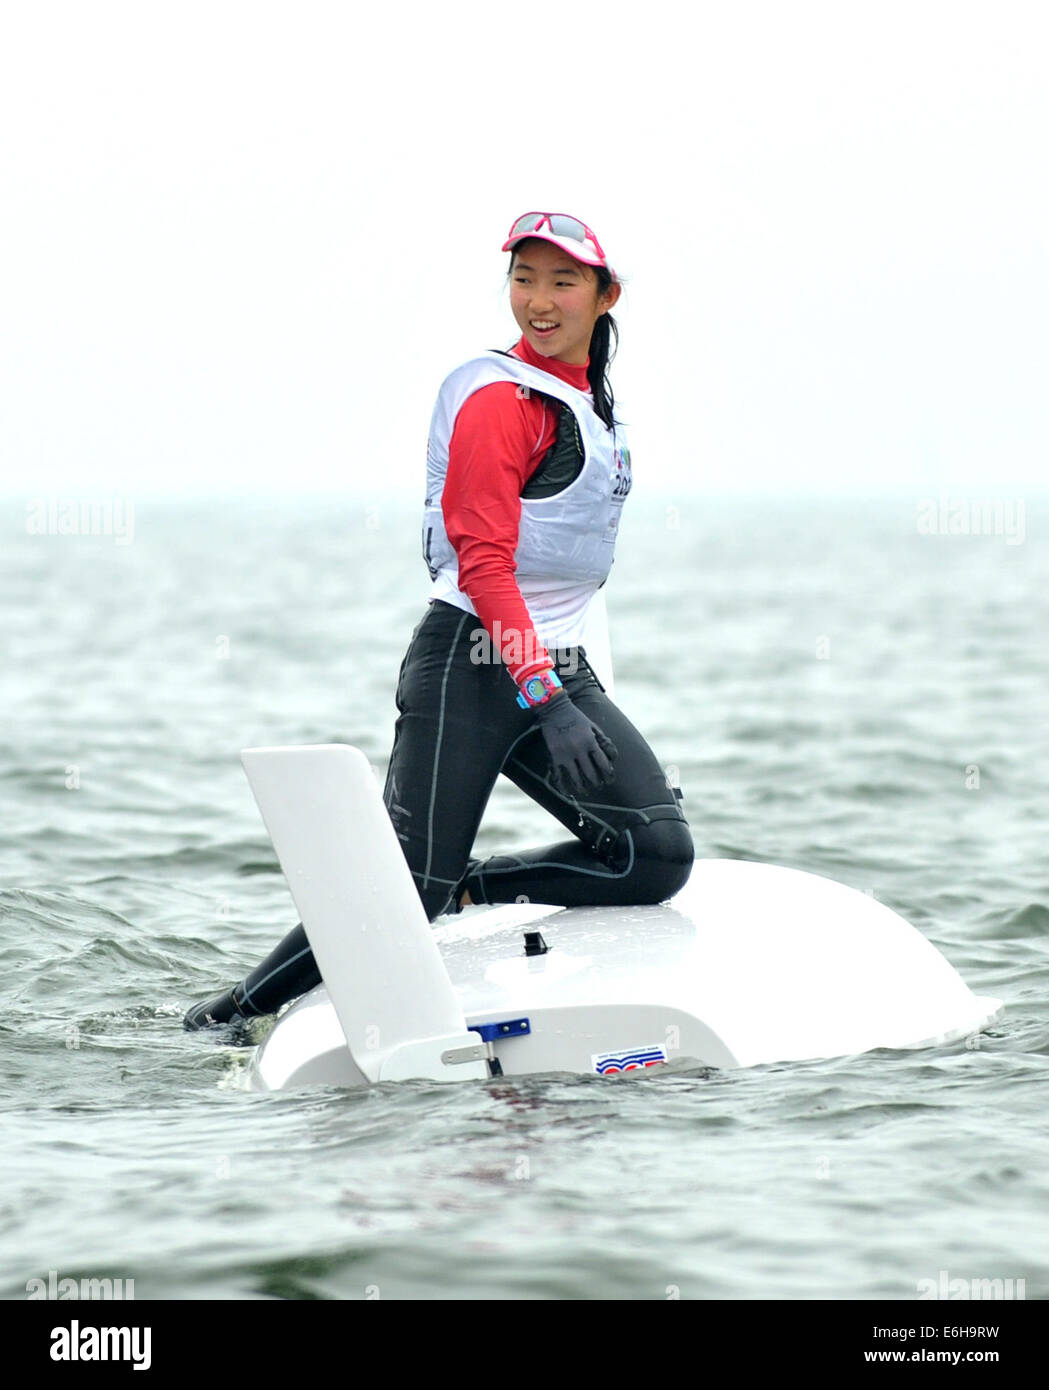 (SP)YOG-CHINA-NANJING-SAILING-WOMEN (140824) -- Samantha Yom of Singapore celebrates after the Byte CII- Women?s One Person Dinghy Final Race of Sailing at the Nanjing 2014 Youth Olympic Games in Nanjing, capital of east China's Jiangsu Province, on August 24, 2014. Samantha Yom won the gold medal. (Xinhua/Yue Yuewei)(jyt) Stock Photo